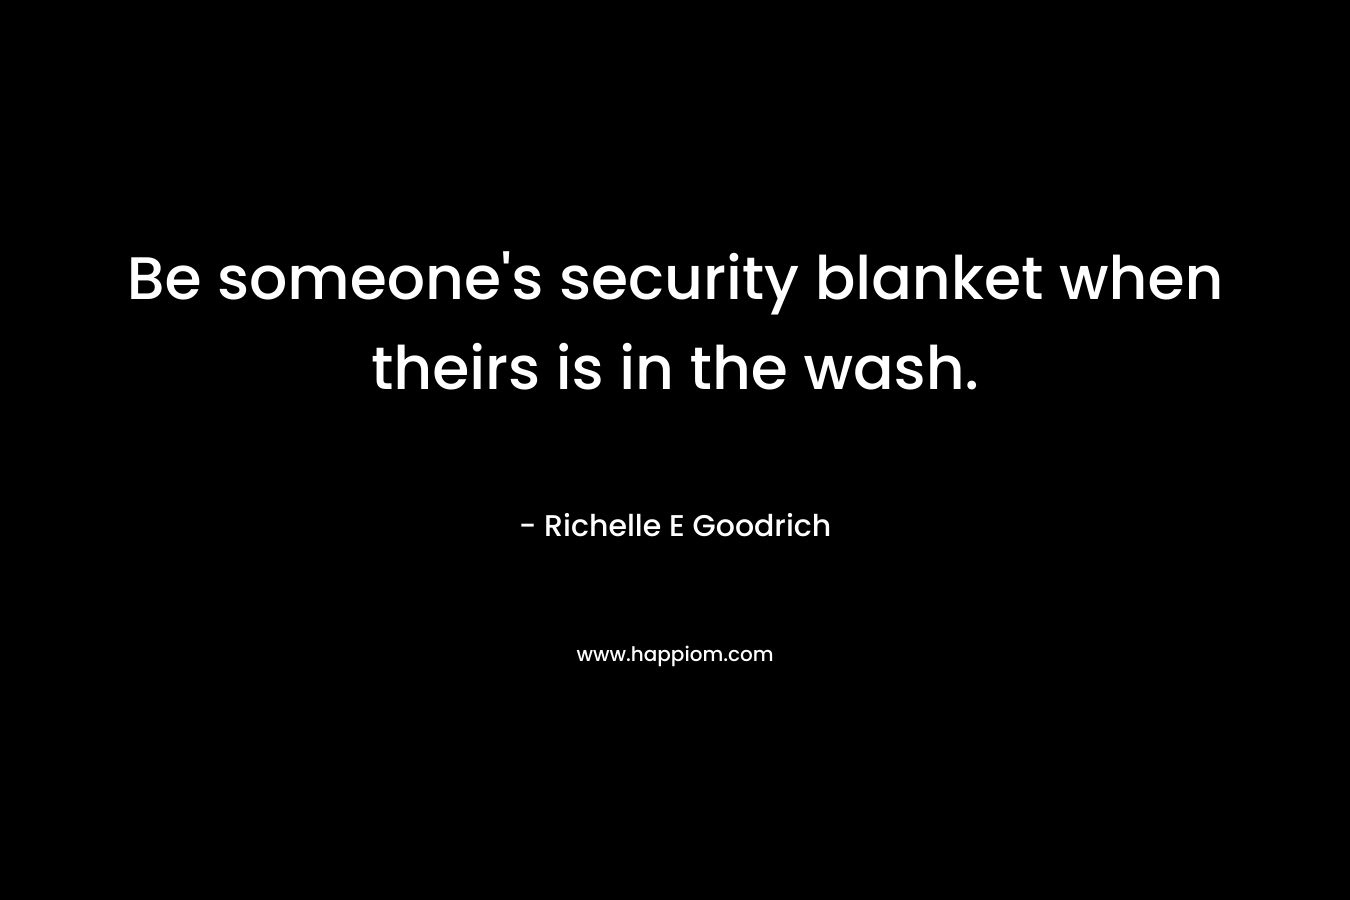 Be someone's security blanket when theirs is in the wash.